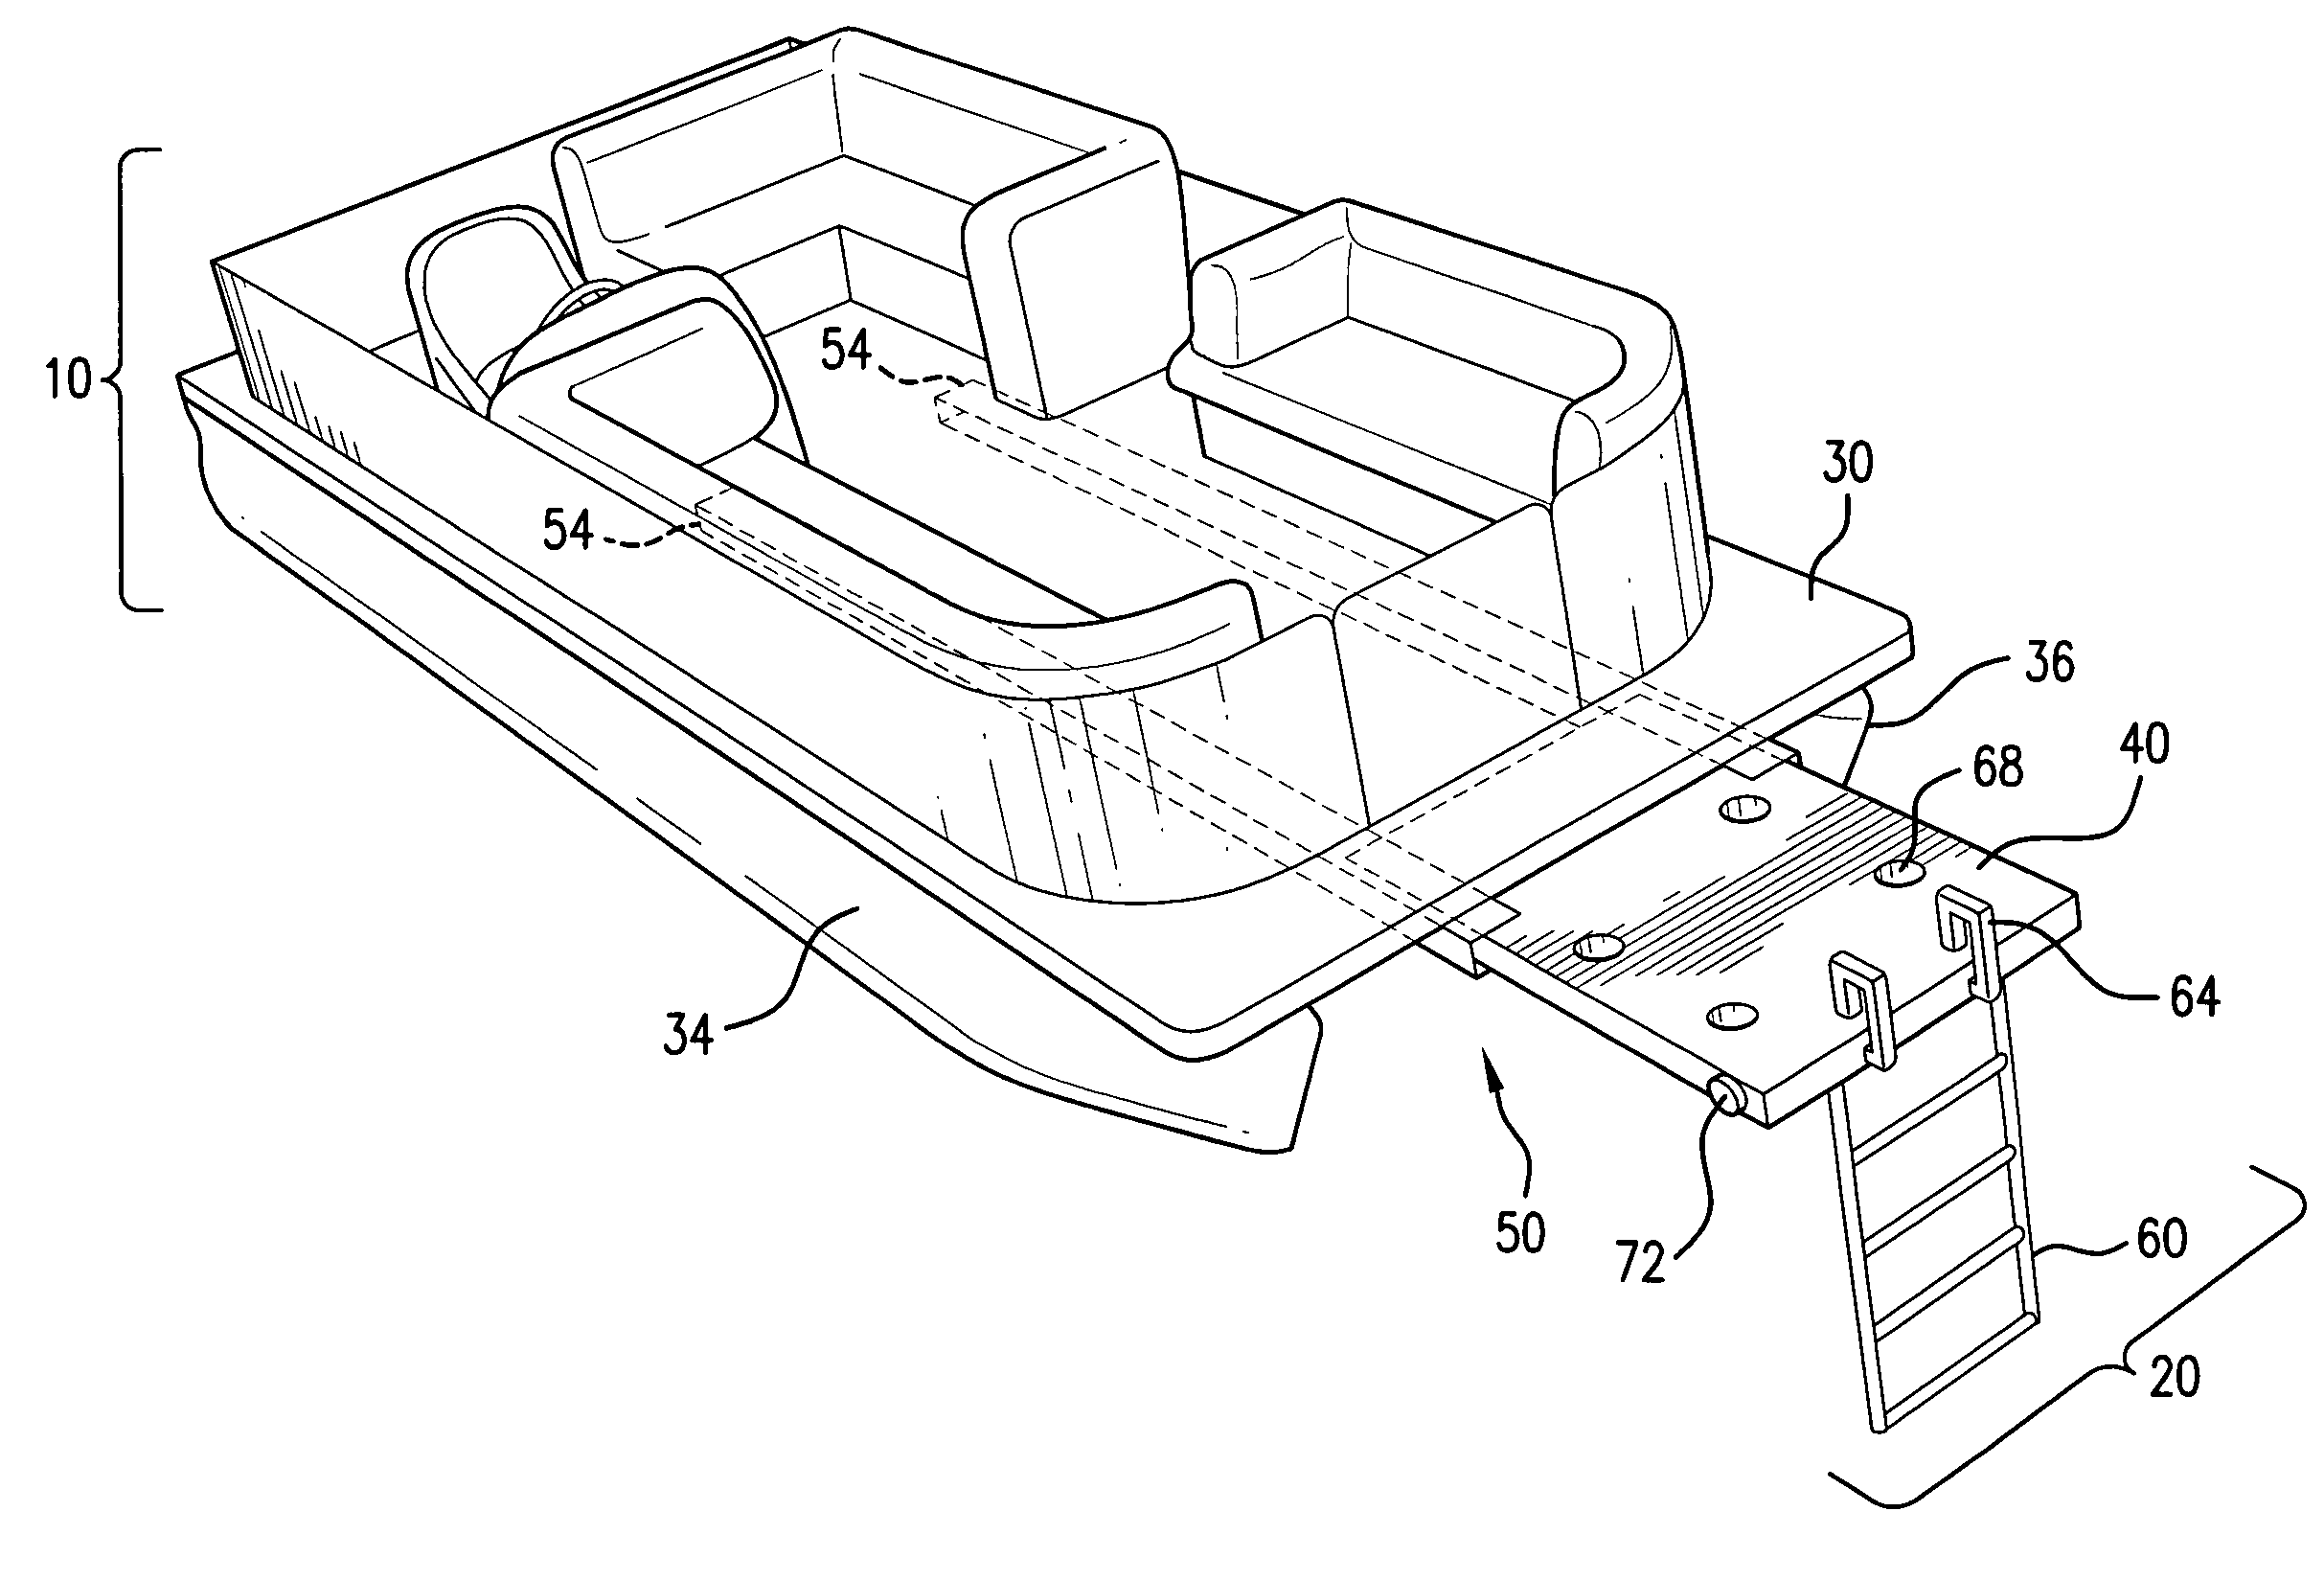 Floating deck apparatus for a pontoon boat